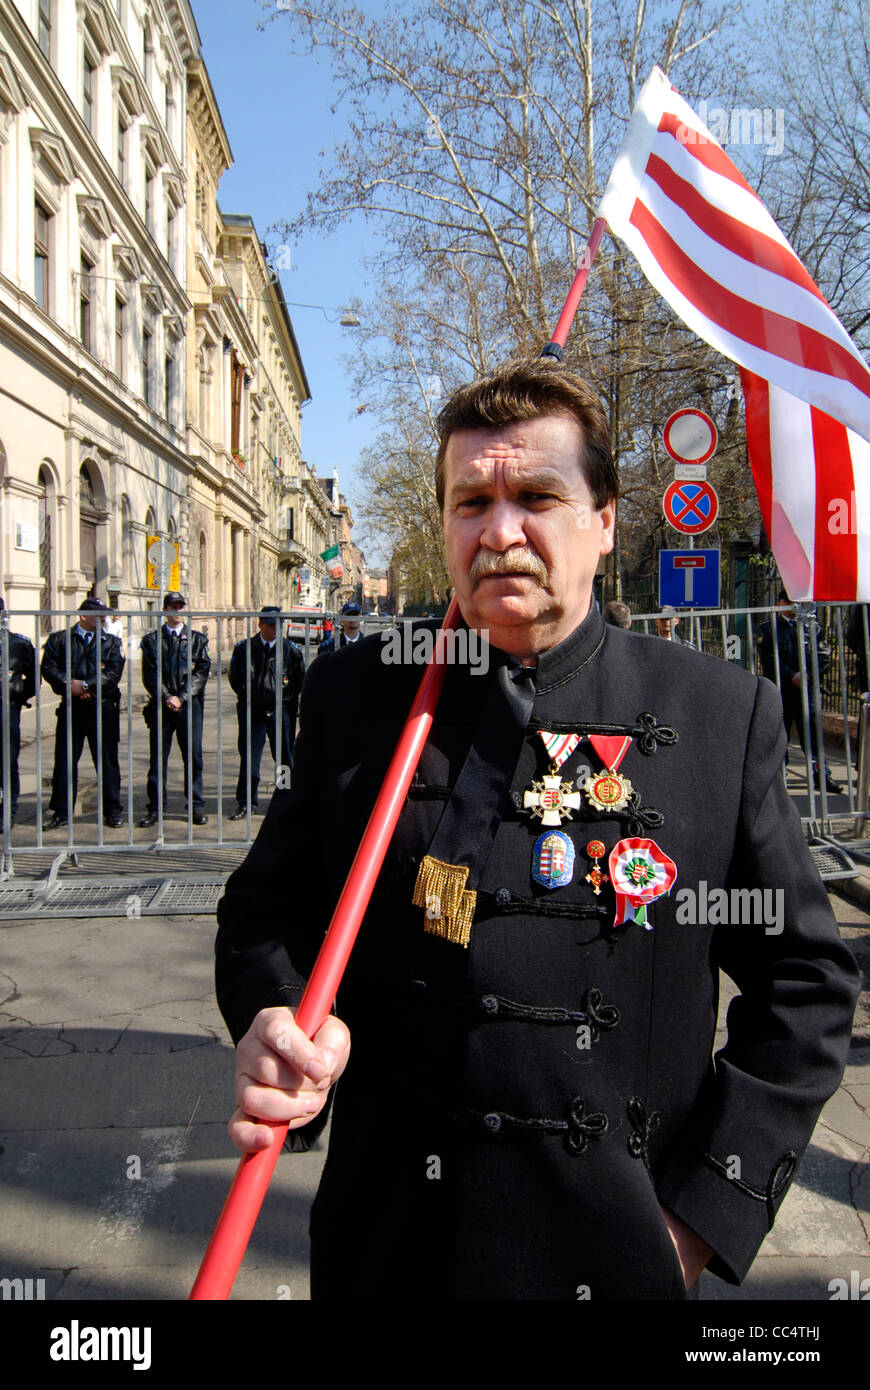 Hungarian man dressed up at the occasion of the 15 March commemoration of the 1848 revolution in Budapest Hungary Stock Photo